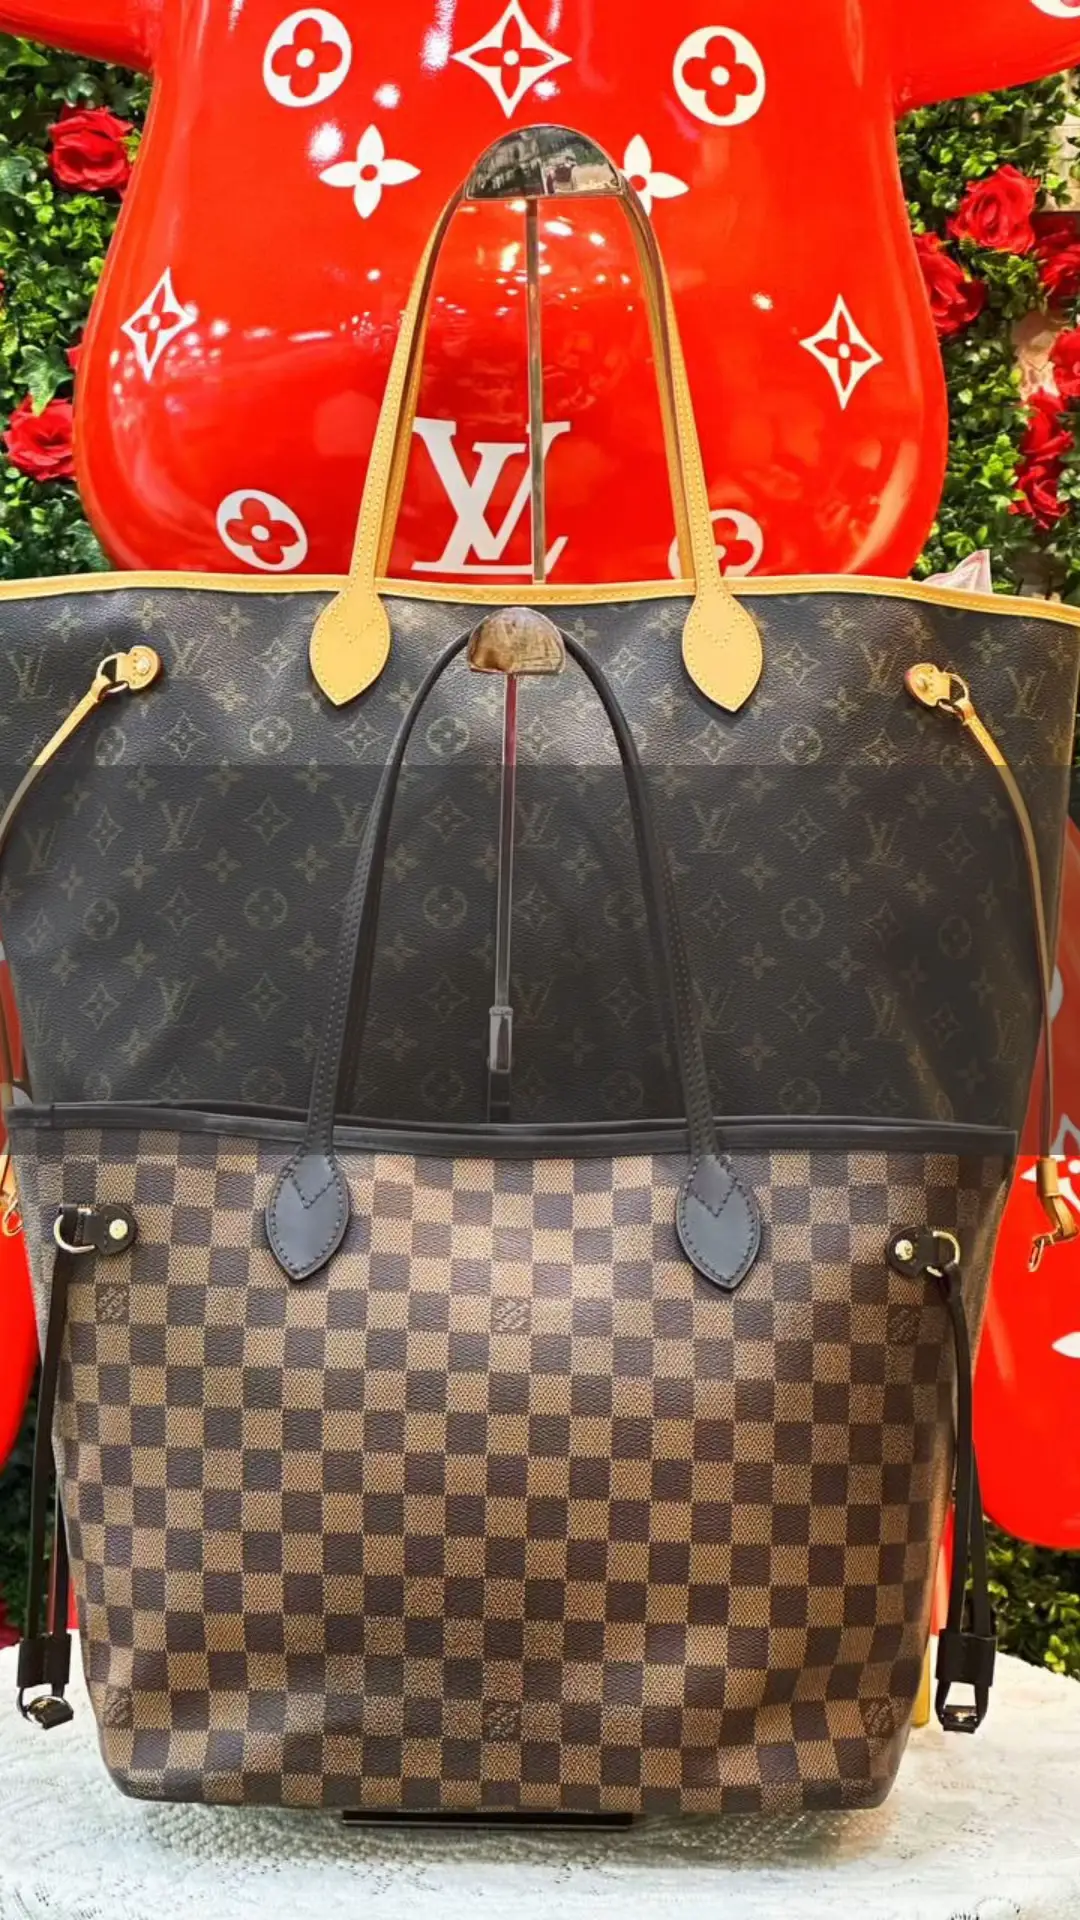 How to clean a Louis Vuitton Bag Inside and Outside Neverfull + Waterproof  Vachetta with Carbon Pro 